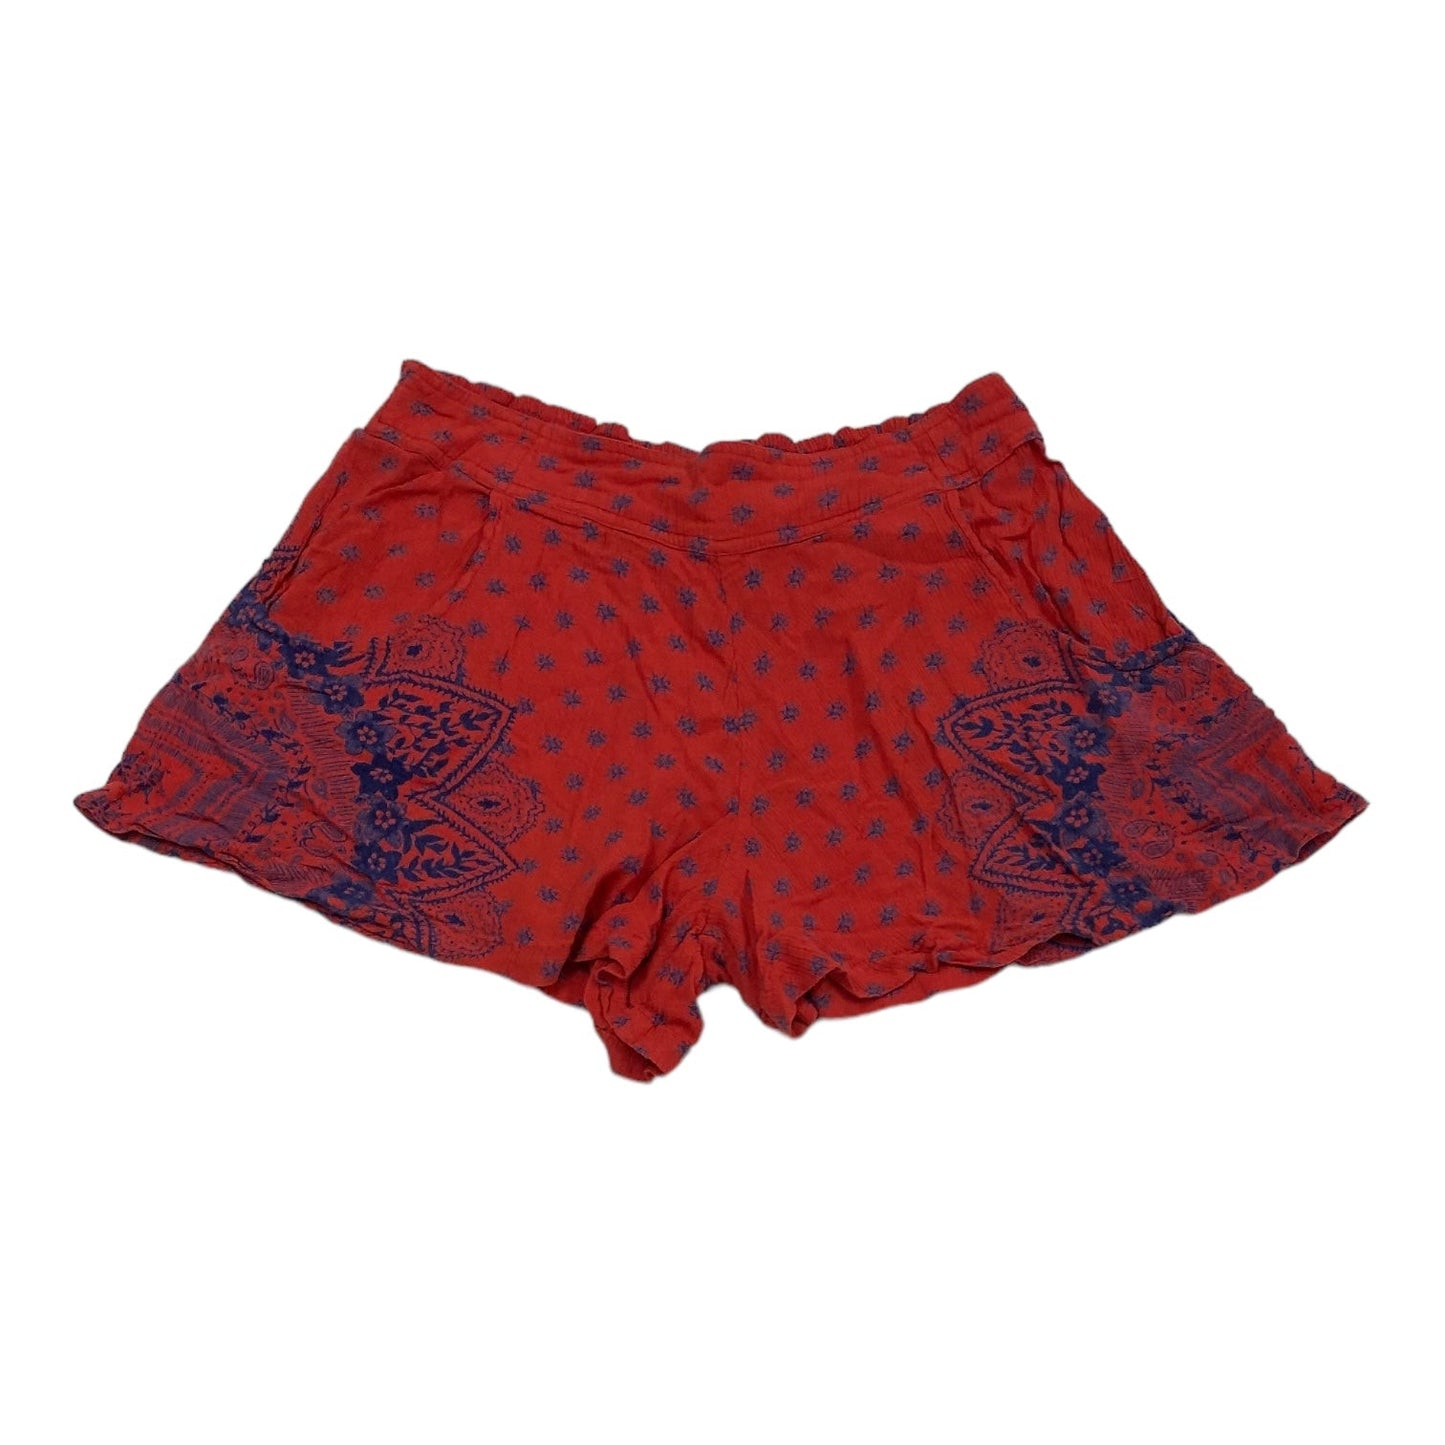 Blue & Red Shorts Free People, Size S